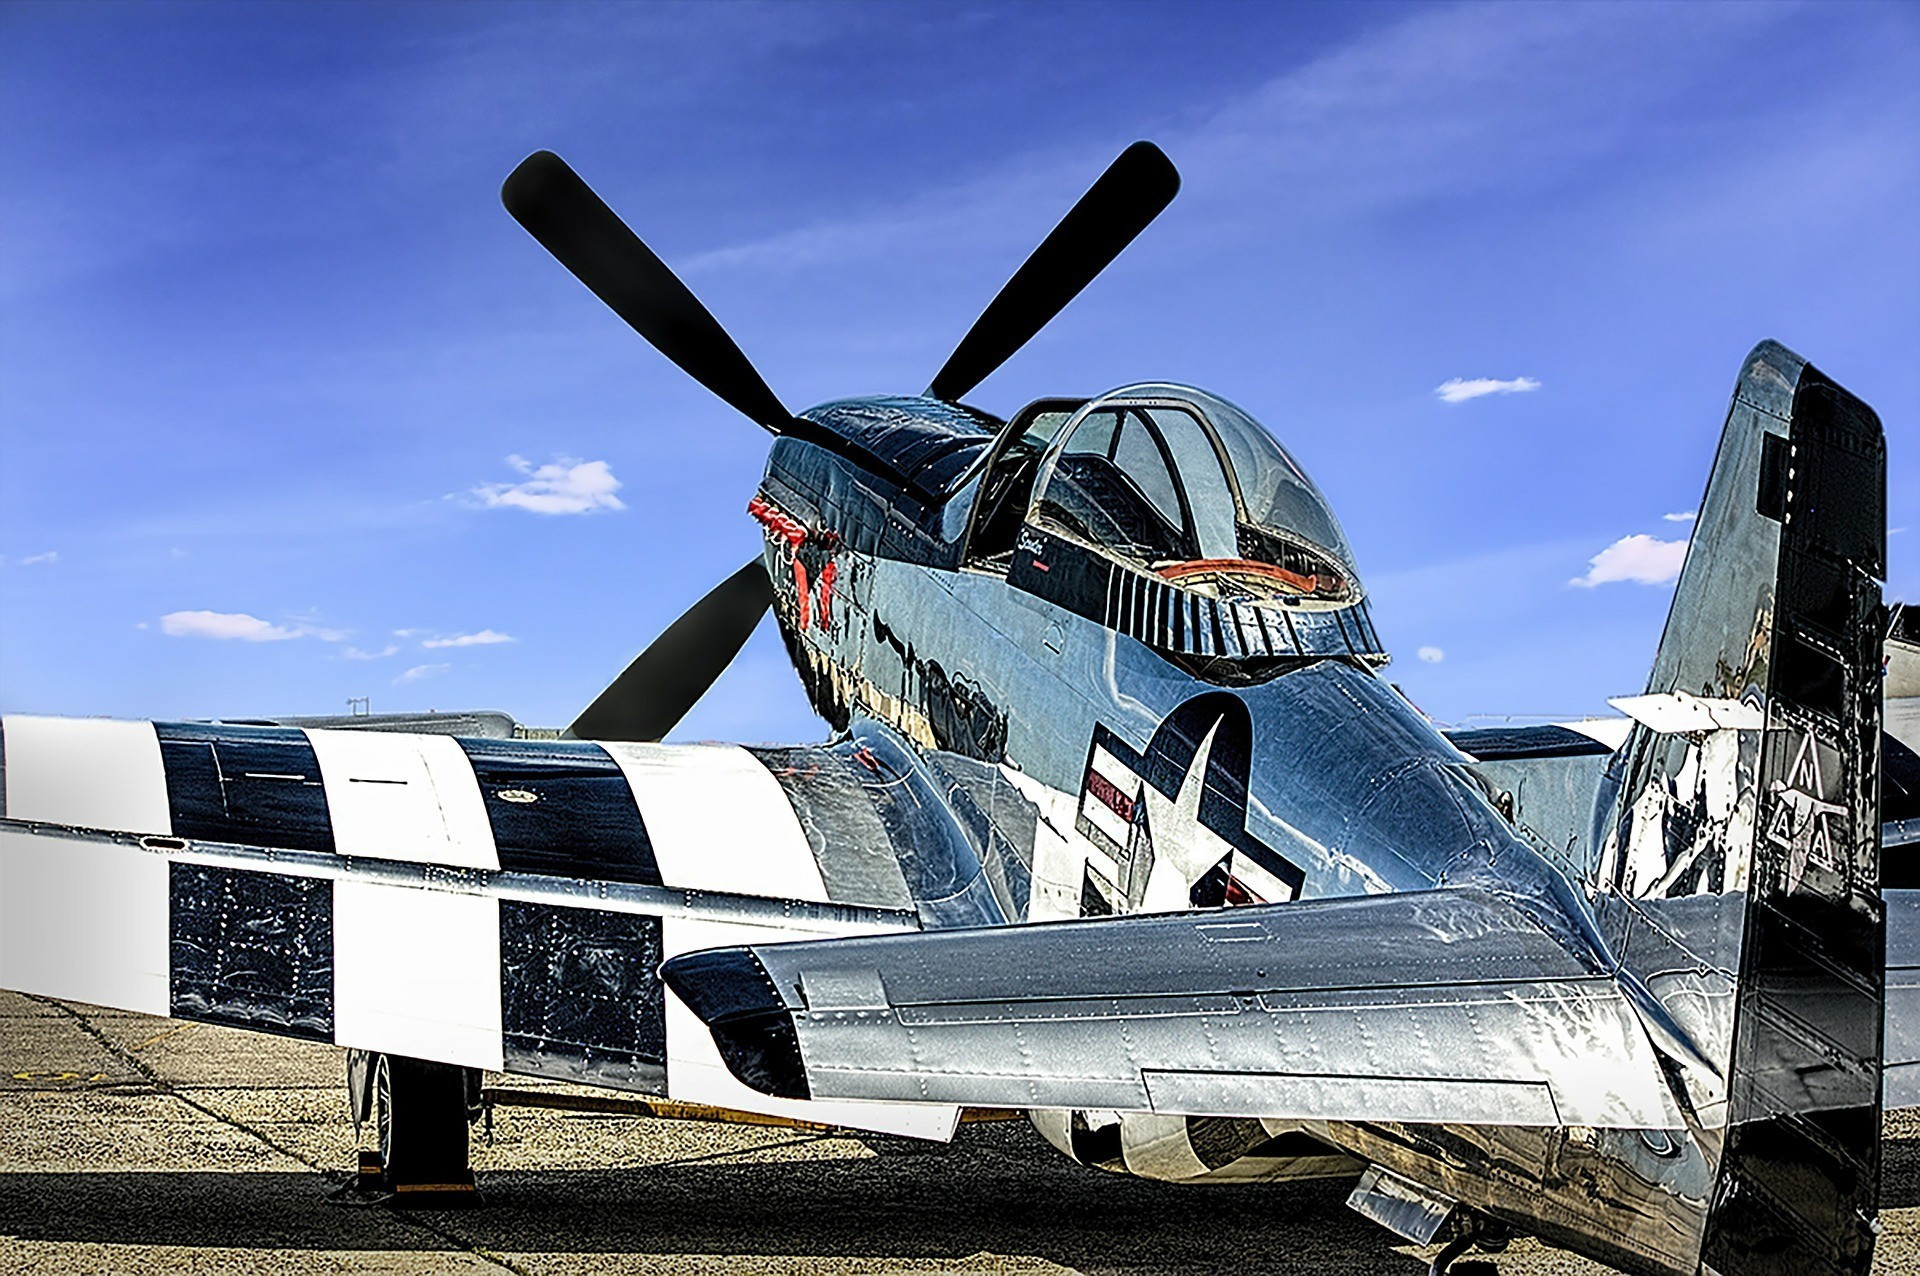 Polished Aluminum on a vintage P-51 Mustang